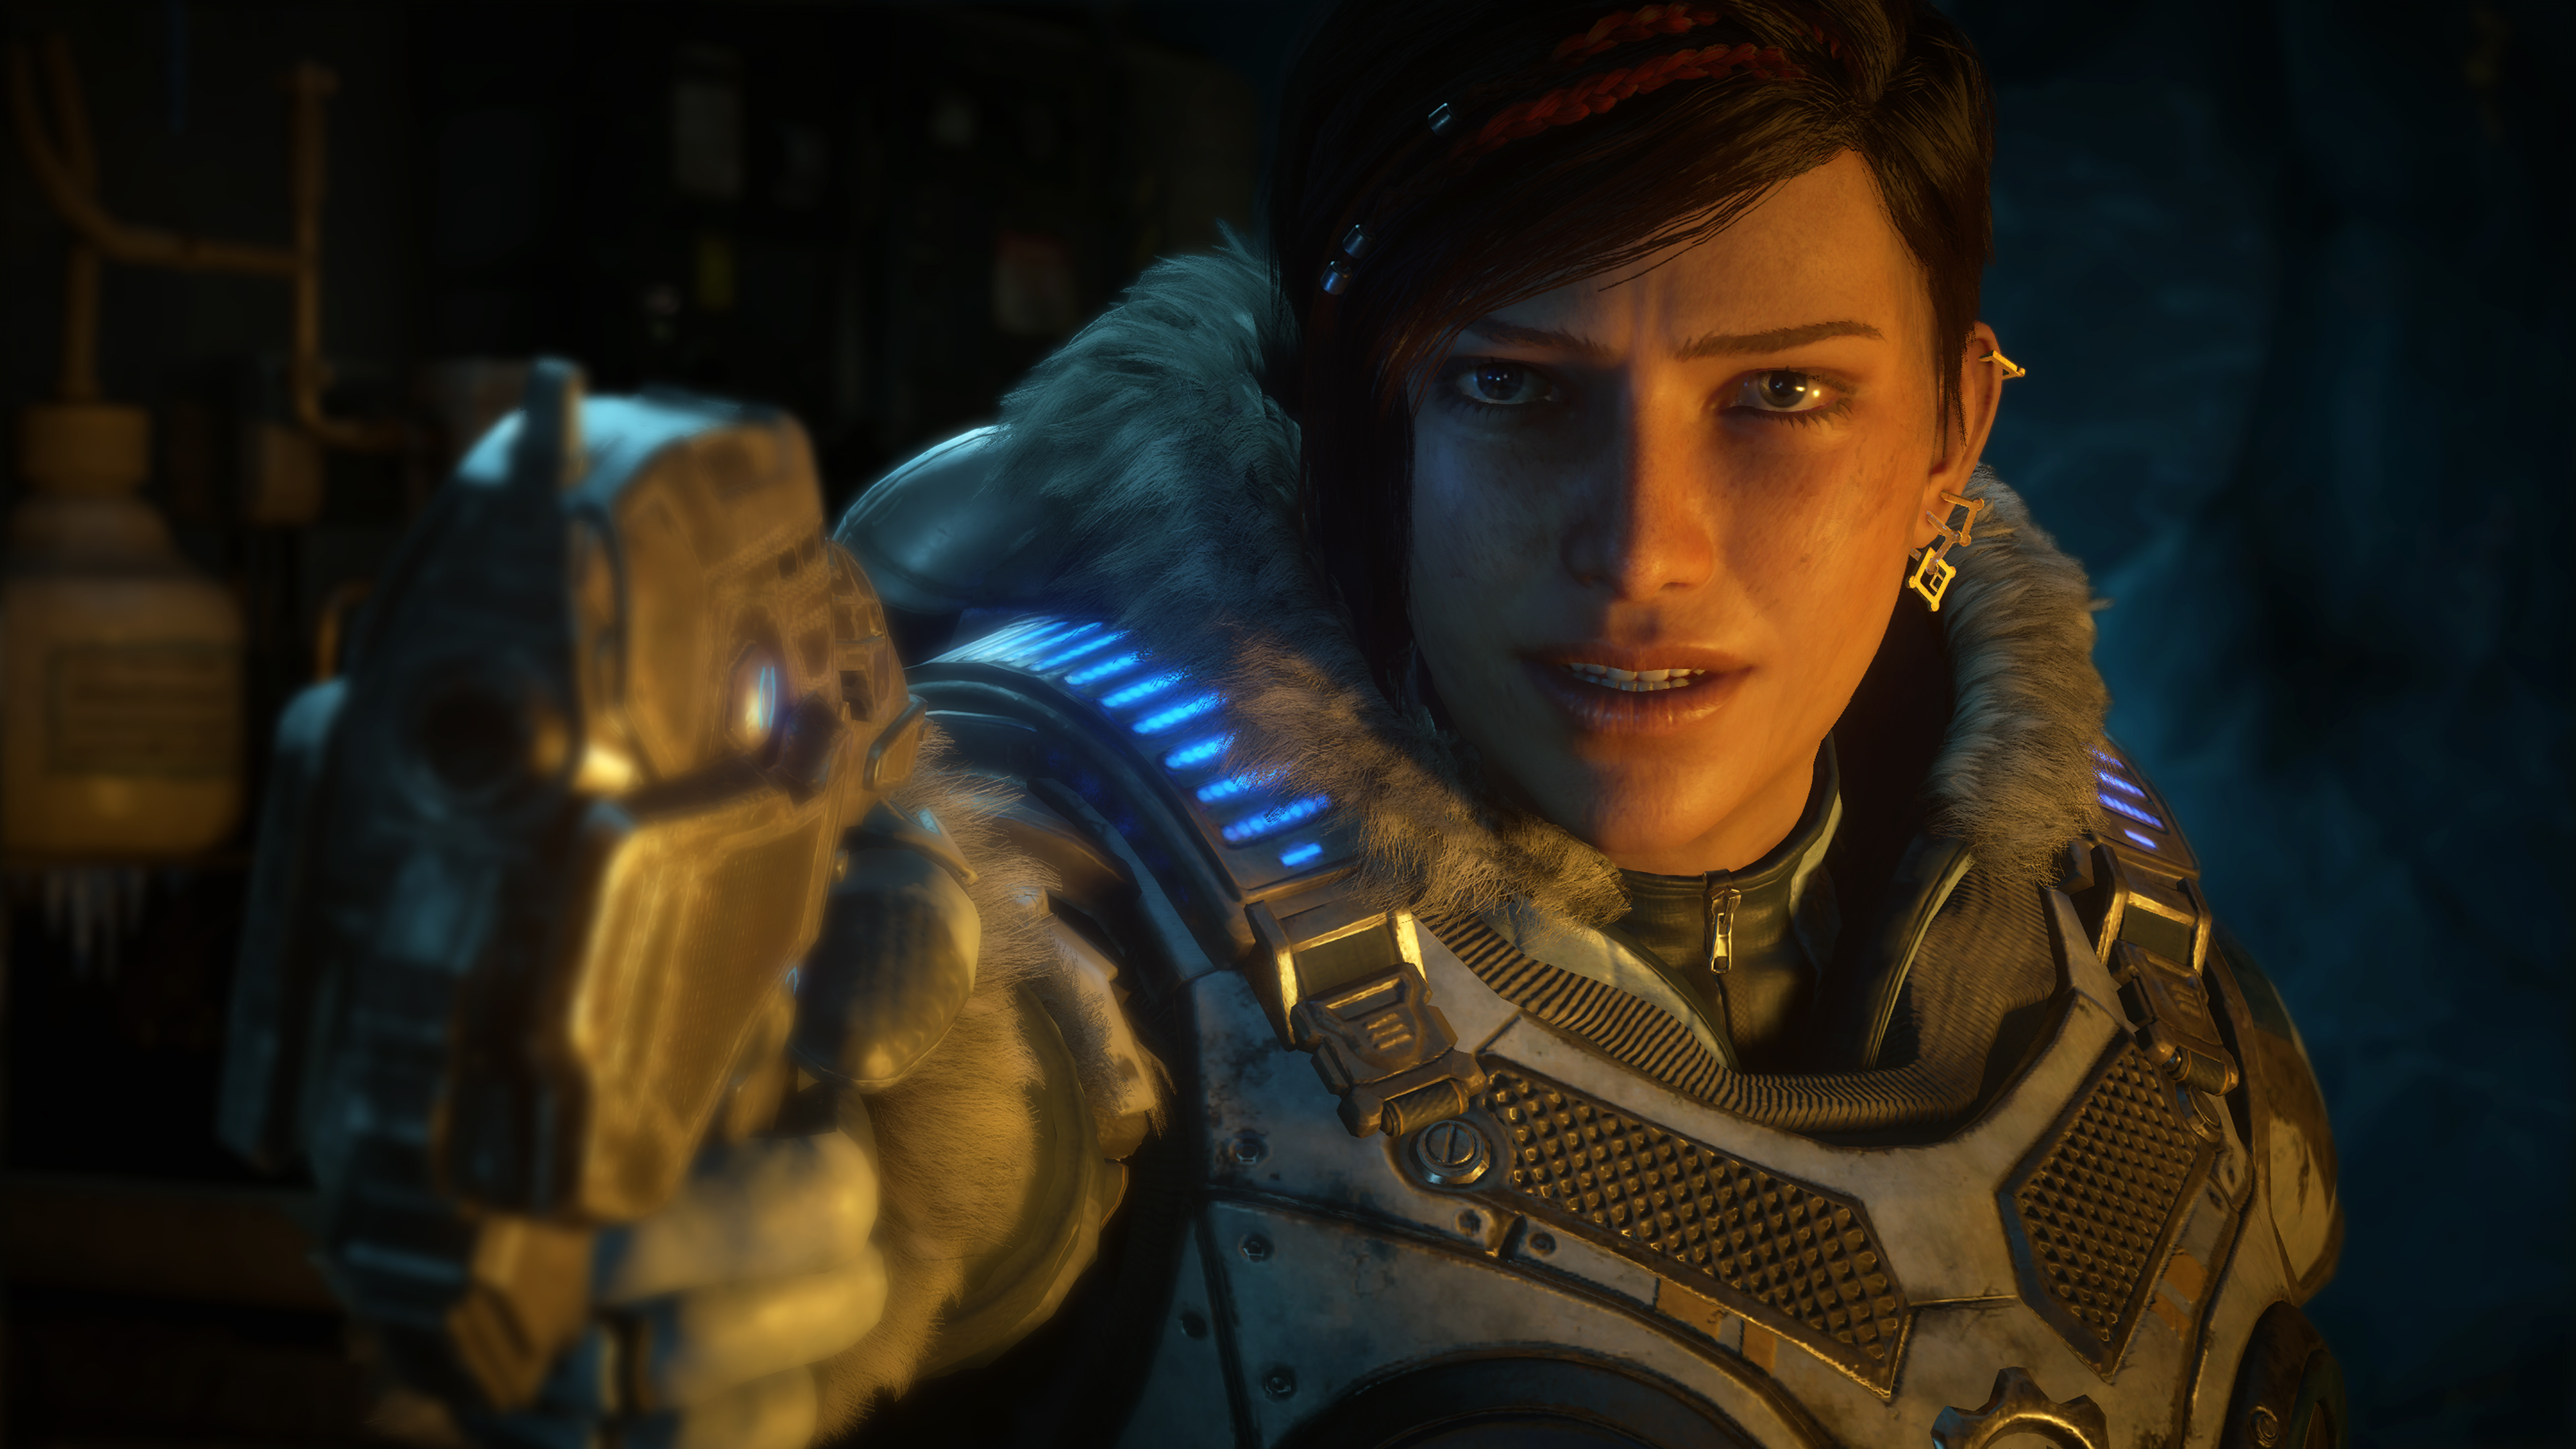 Gears of War 5's Kate draws a pistol and points it toward the camera in the Gears of War 5 review for Vice Waypoint